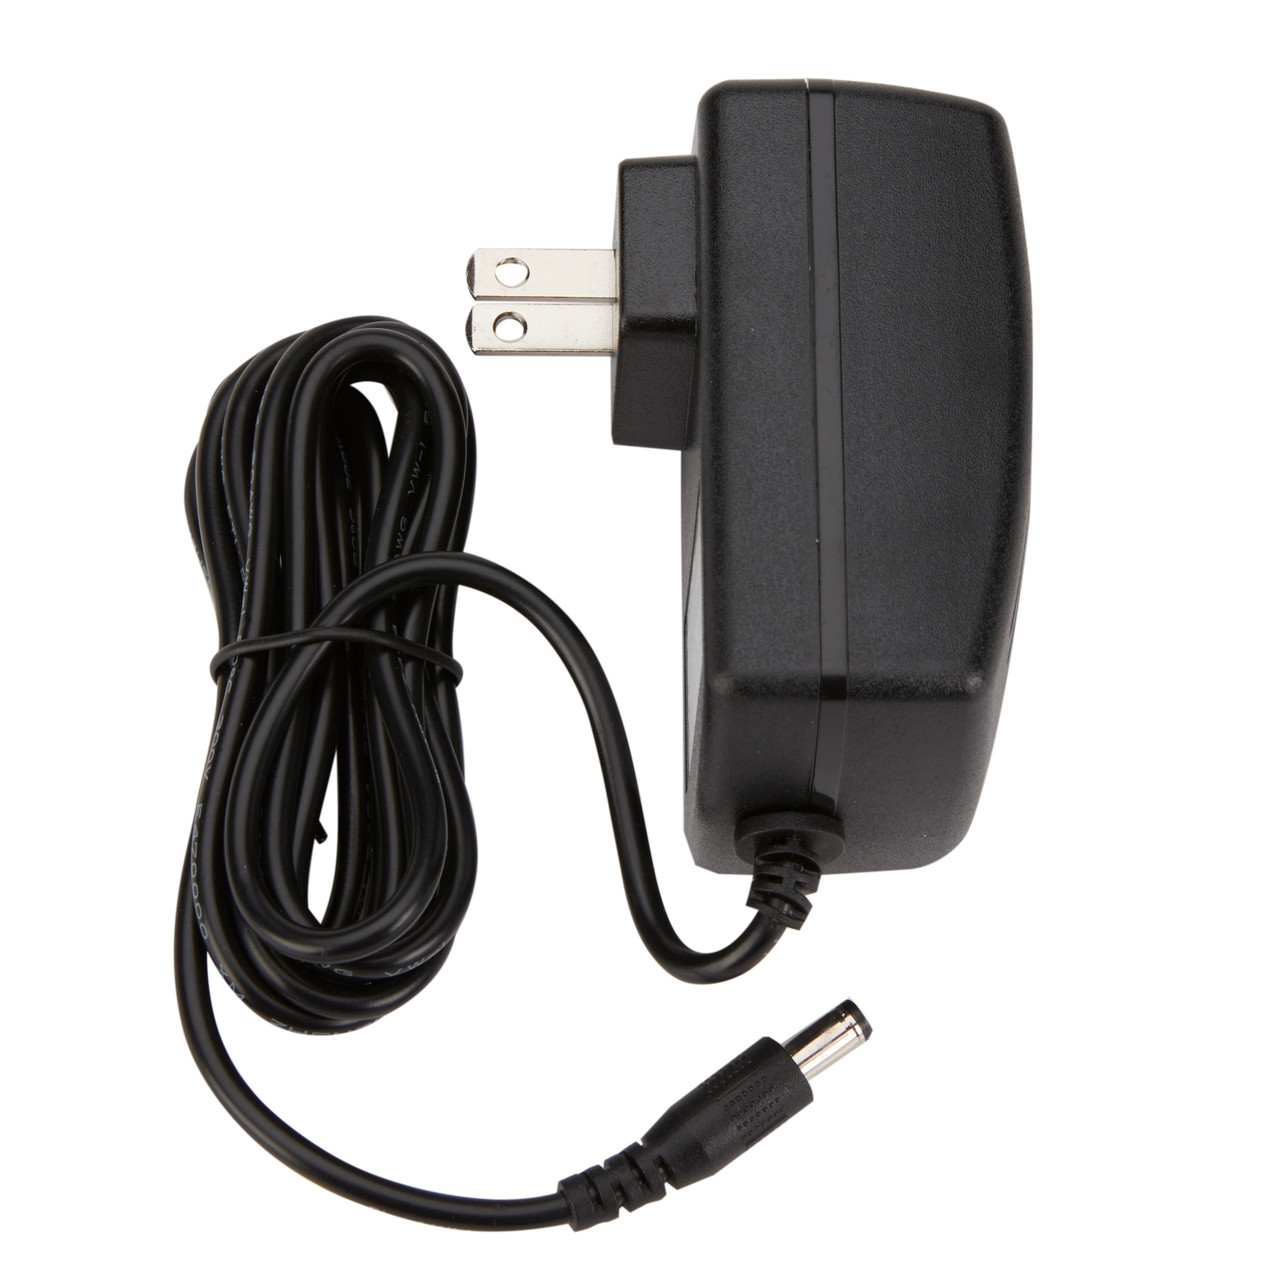 Replacement Power Adapter Part for NMS-675H - Homedics